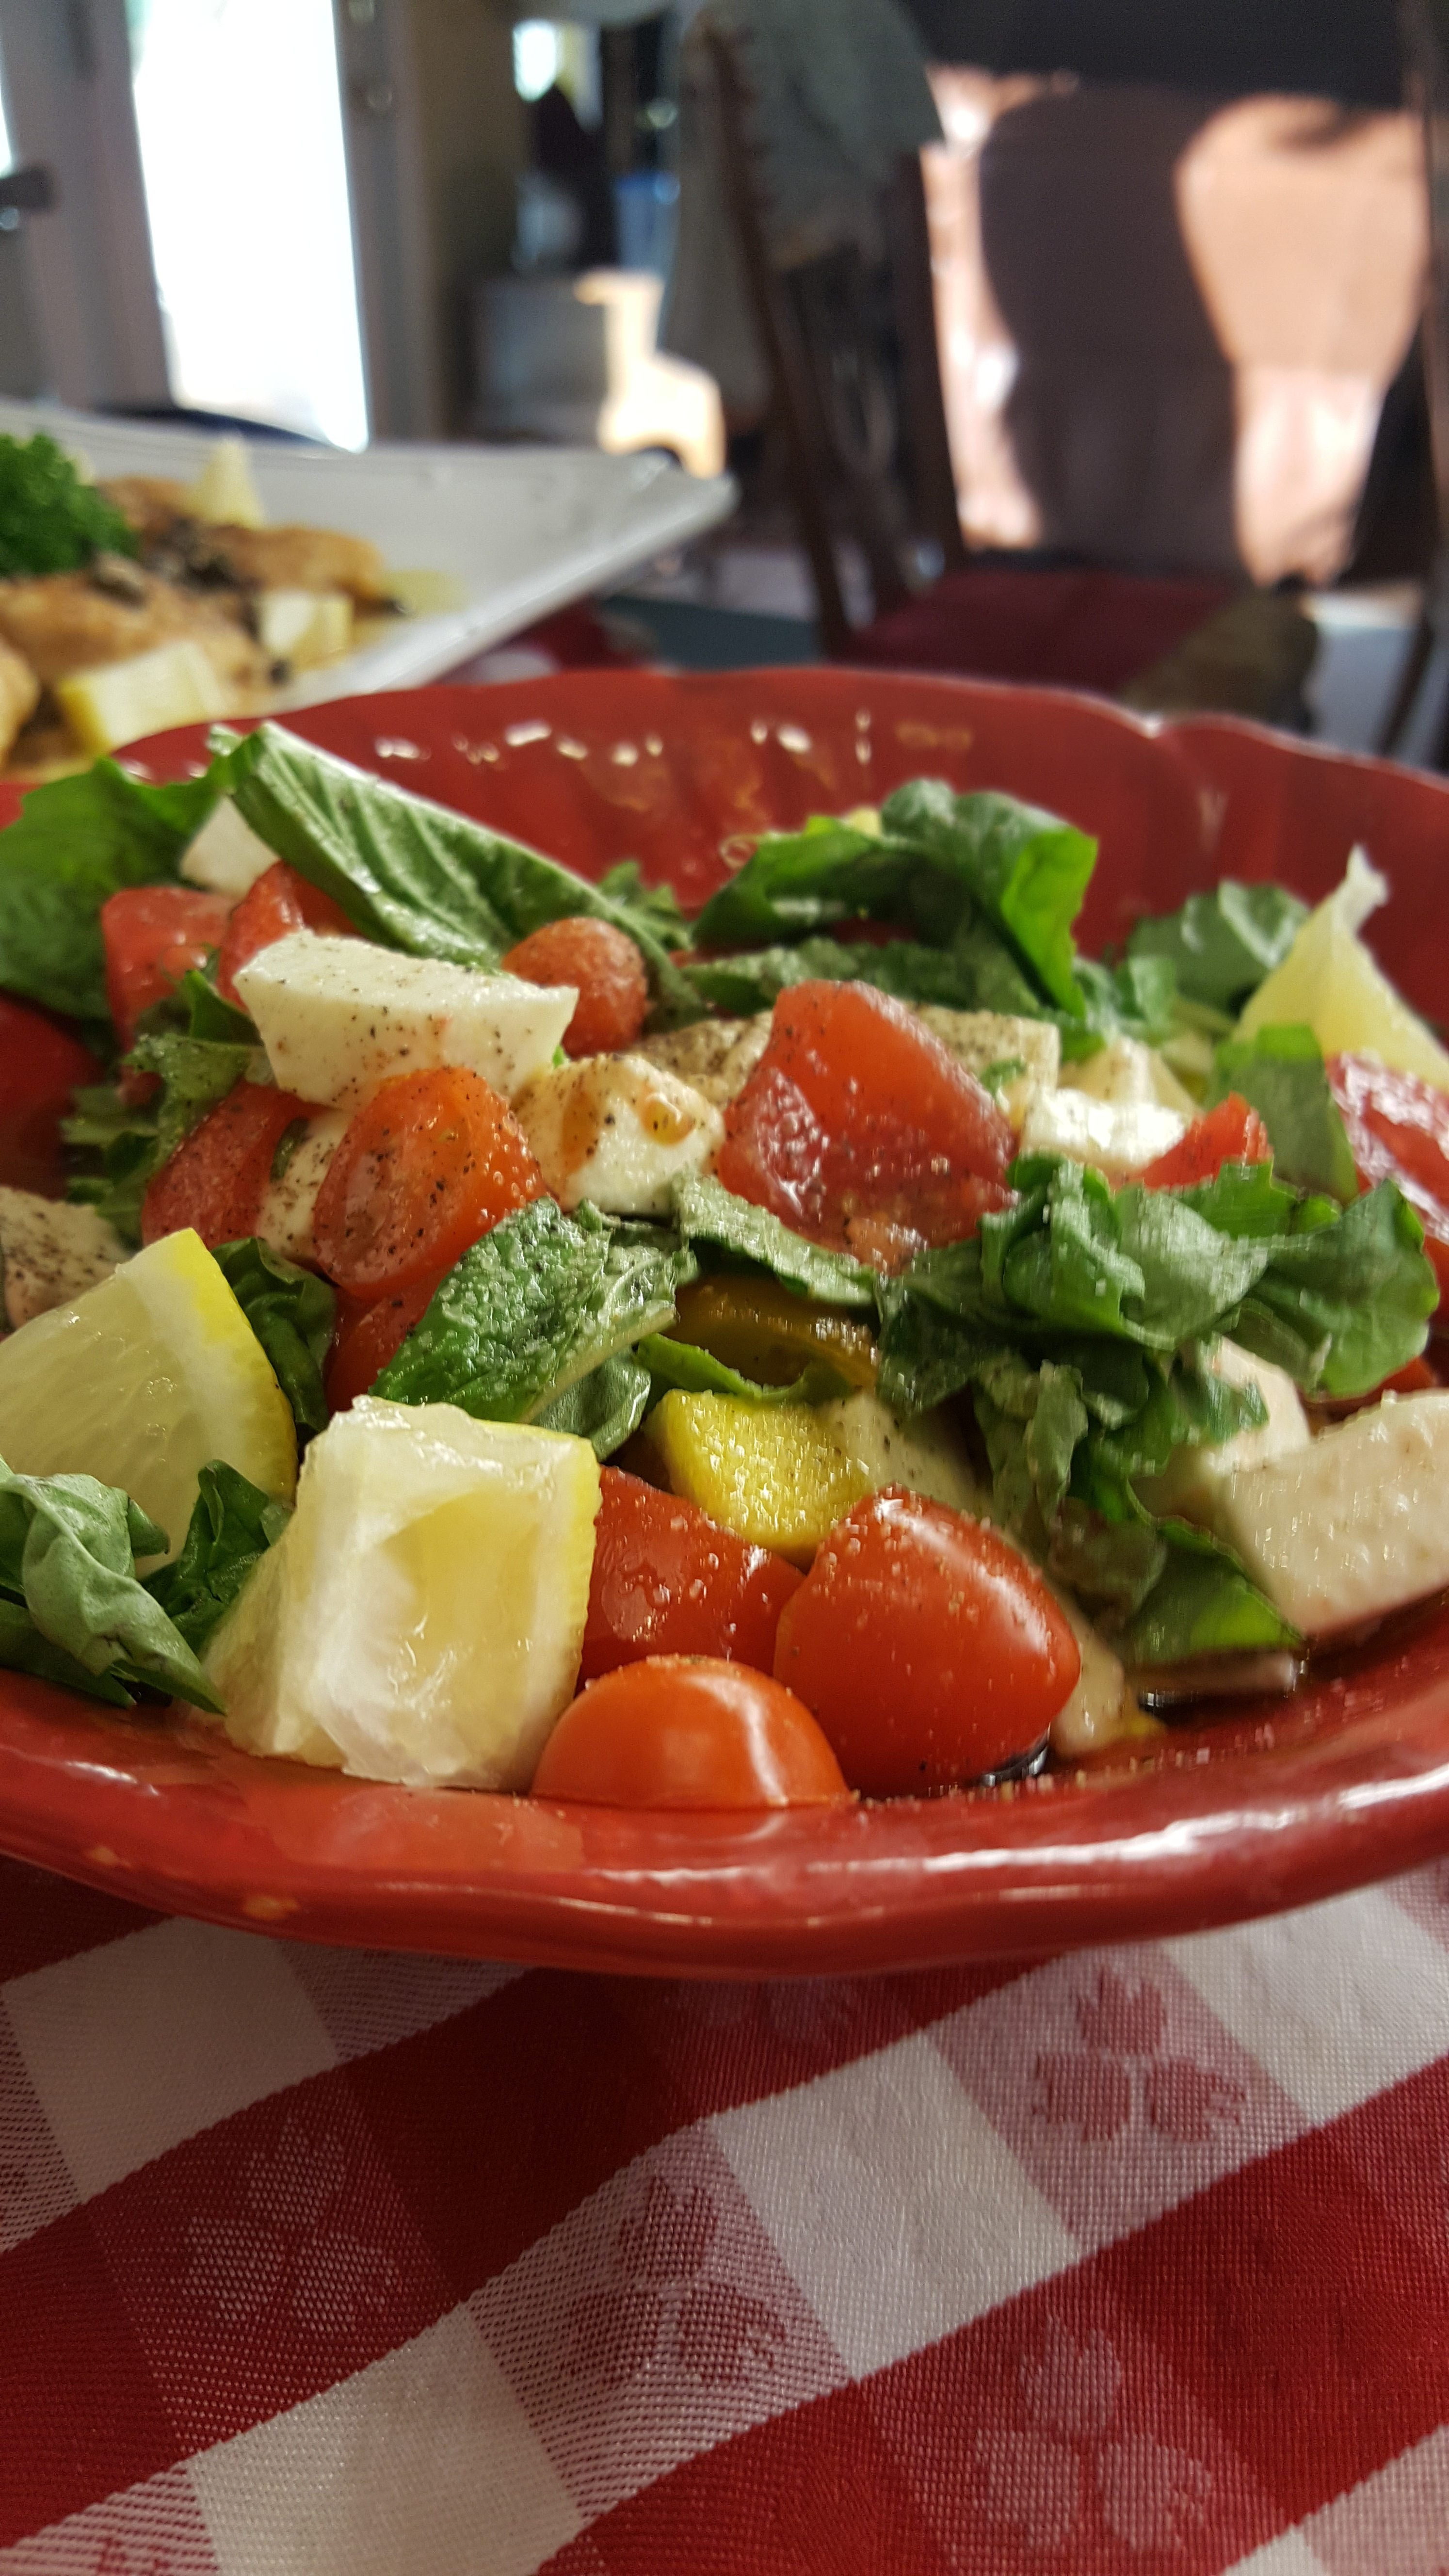 A red bowl of salad with tomatoes and lettuce.